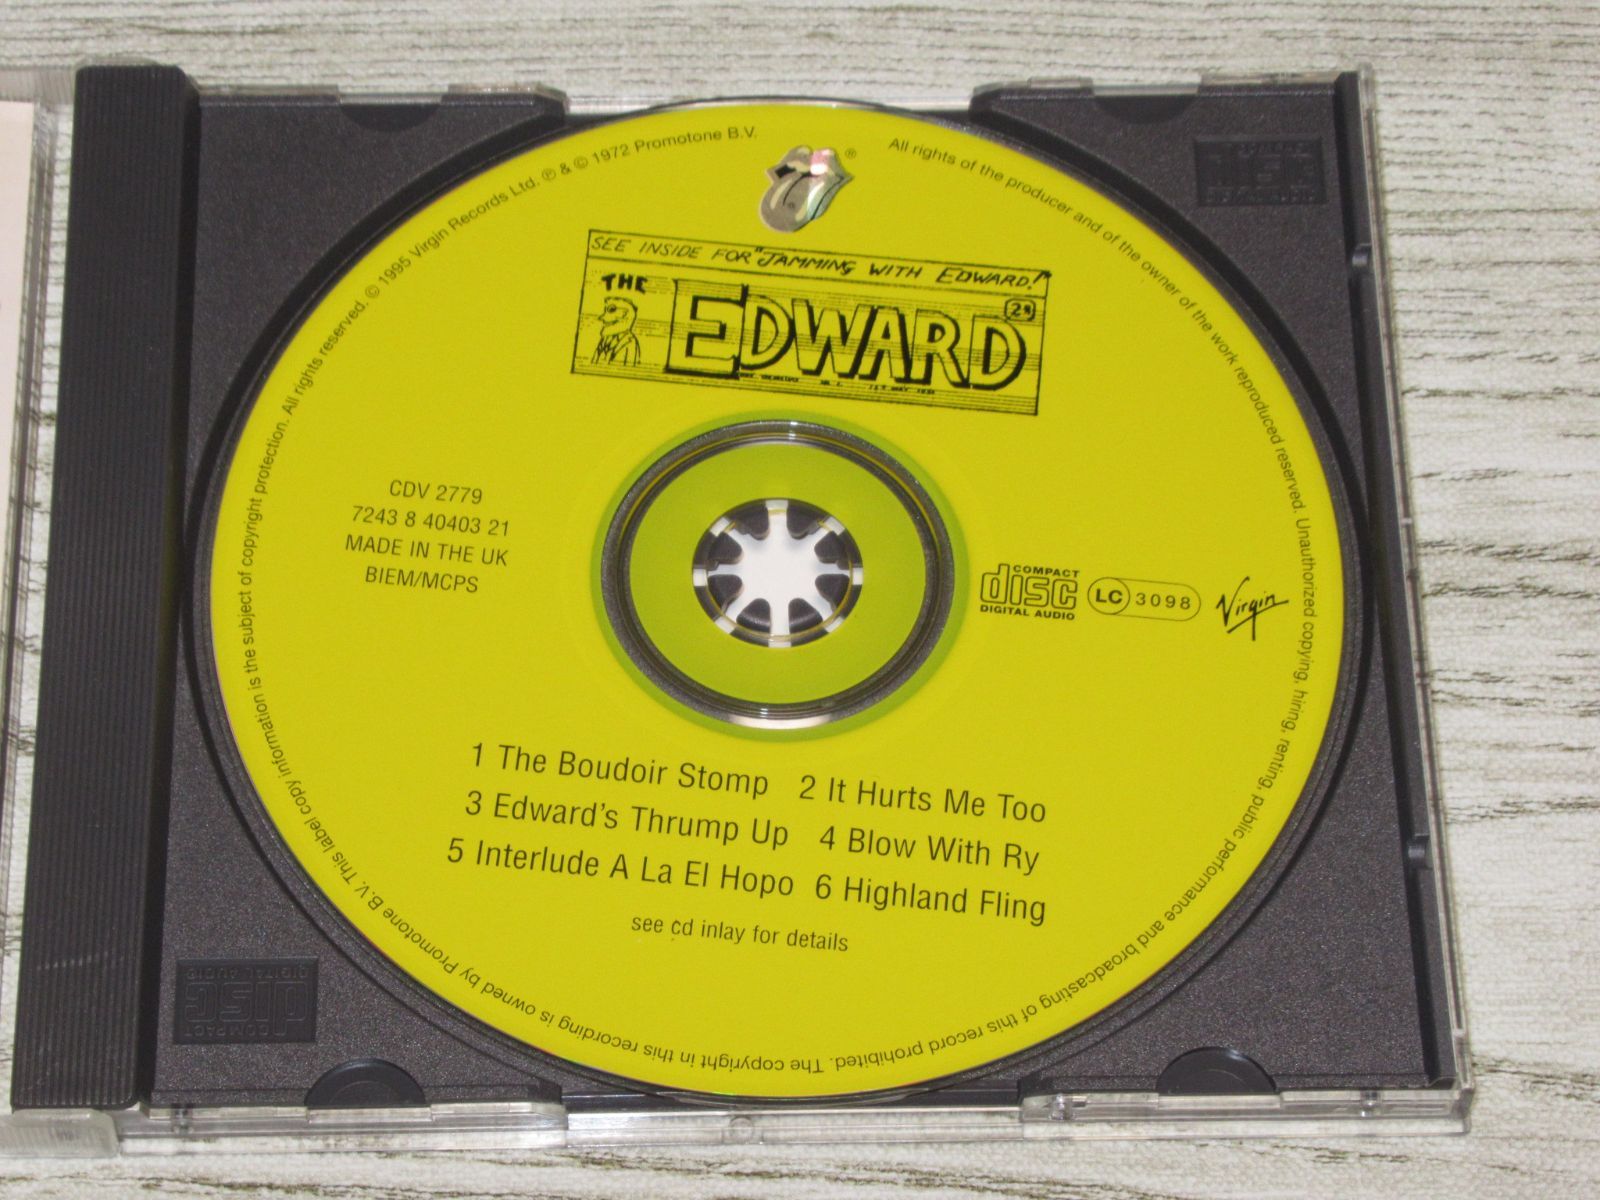 CD JAMMING WITH EDWARD MADE IN THE UK EMI SWINDON CDV 2779 全6曲 